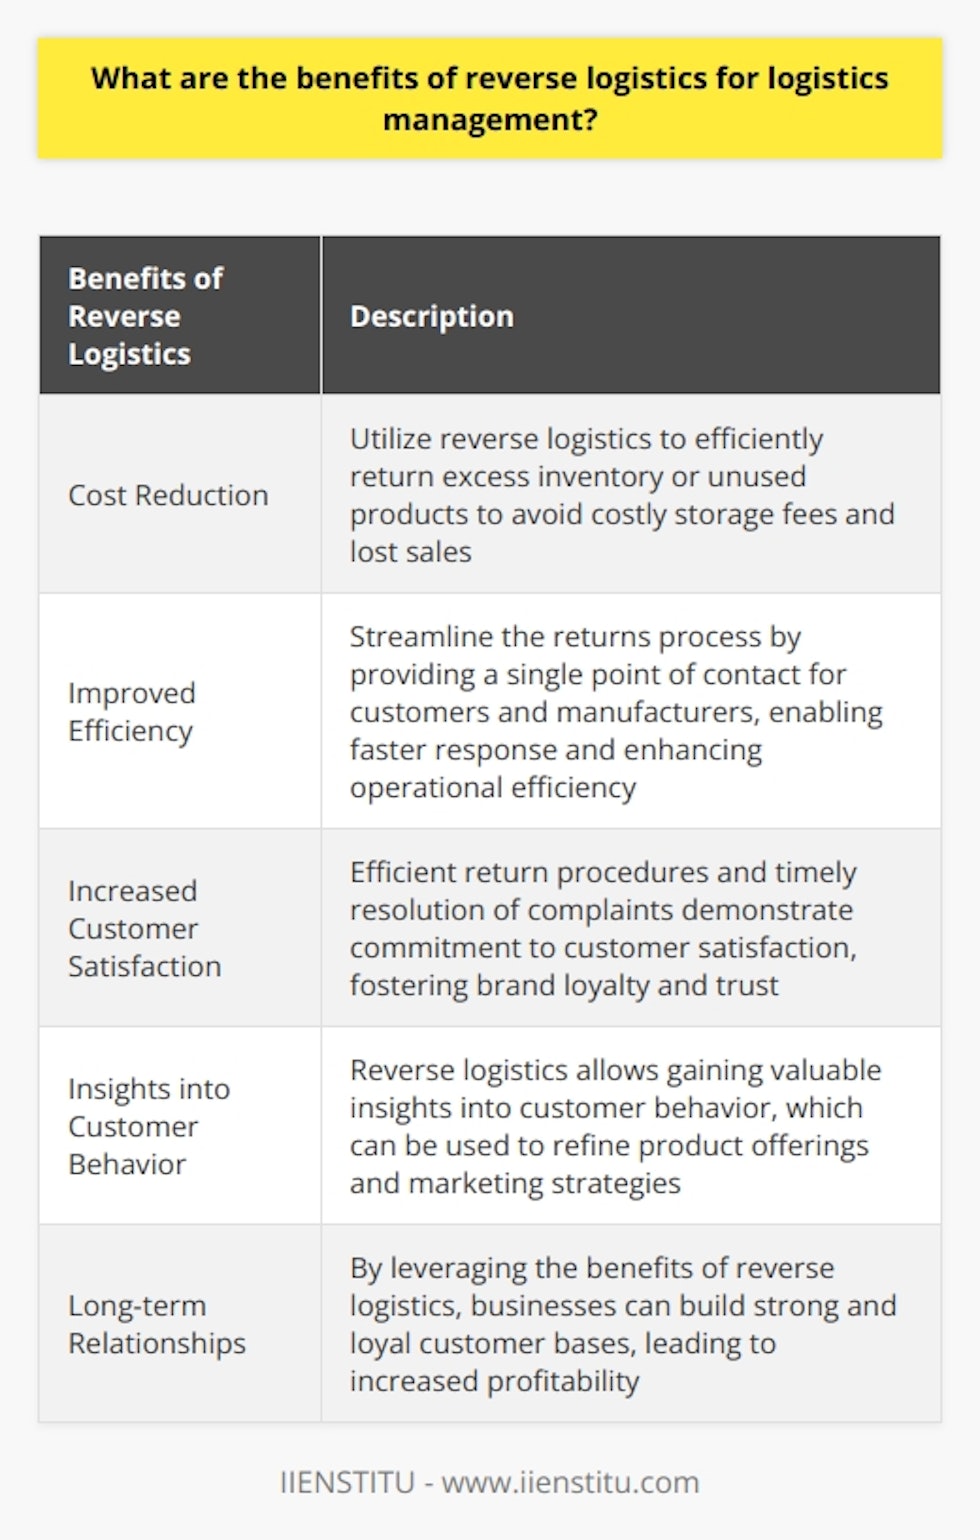 Reverse logistics refers to the process of moving goods from their final destination back to their source of origin. This type of logistics is becoming increasingly important in the field of supply chain and logistics management as it offers a range of benefits that can help businesses reduce costs, improve efficiency, and increase customer satisfaction.One of the key benefits of reverse logistics is its ability to reduce costs for businesses. Companies can utilize reverse logistics to quickly and efficiently return excess inventory or unused products. By doing so, they can avoid costly storage fees associated with excess inventory and prevent lost sales caused by slow-moving products. Furthermore, businesses can save money by avoiding fines due to late returns or product disposal fees related to disposing of unusable items. By effectively managing their reverse logistics, companies can minimize unnecessary expenses and maximize their overall profitability.In addition to cost reduction, reverse logistics can also improve efficiency in several ways. By providing a single point of contact for both customers and manufacturers, reverse logistics streamlines the returns process. This eliminates the need for multiple returns processes and enables companies to respond more quickly when dealing with customer inquiries regarding product returns or exchanges. By simplifying and expediting the returns process, businesses can enhance their operational efficiency and ensure a higher level of customer satisfaction.Furthermore, an effective implementation of reverse logistics can lead to increased customer satisfaction, which is crucial for fostering brand loyalty and building trust in the long-term relationship between a business and its customers. By providing efficient return procedures and timely resolution of complaints related to returns or exchanges, companies can demonstrate their commitment to customer satisfaction. This helps to build trust and loyalty over time. Additionally, reverse logistics allows companies to gain valuable insights into customer behavior, which can be used to refine their product offerings or marketing strategies accordingly. Understanding customer needs and preferences is instrumental in meeting their expectations and fostering a strong and loyal customer base.In conclusion, reverse logistics offers numerous benefits for logistics management. By effectively implementing reverse logistic strategies, businesses can reduce costs, improve efficiency, and increase customer satisfaction. This not only enhances their profitability but also helps in building long-term relationships with customers. Therefore, it is crucial for managers involved in supply chain operations to stay updated with developments in reverse logistics to leverage these advantages effectively within their organization's operations in the future.